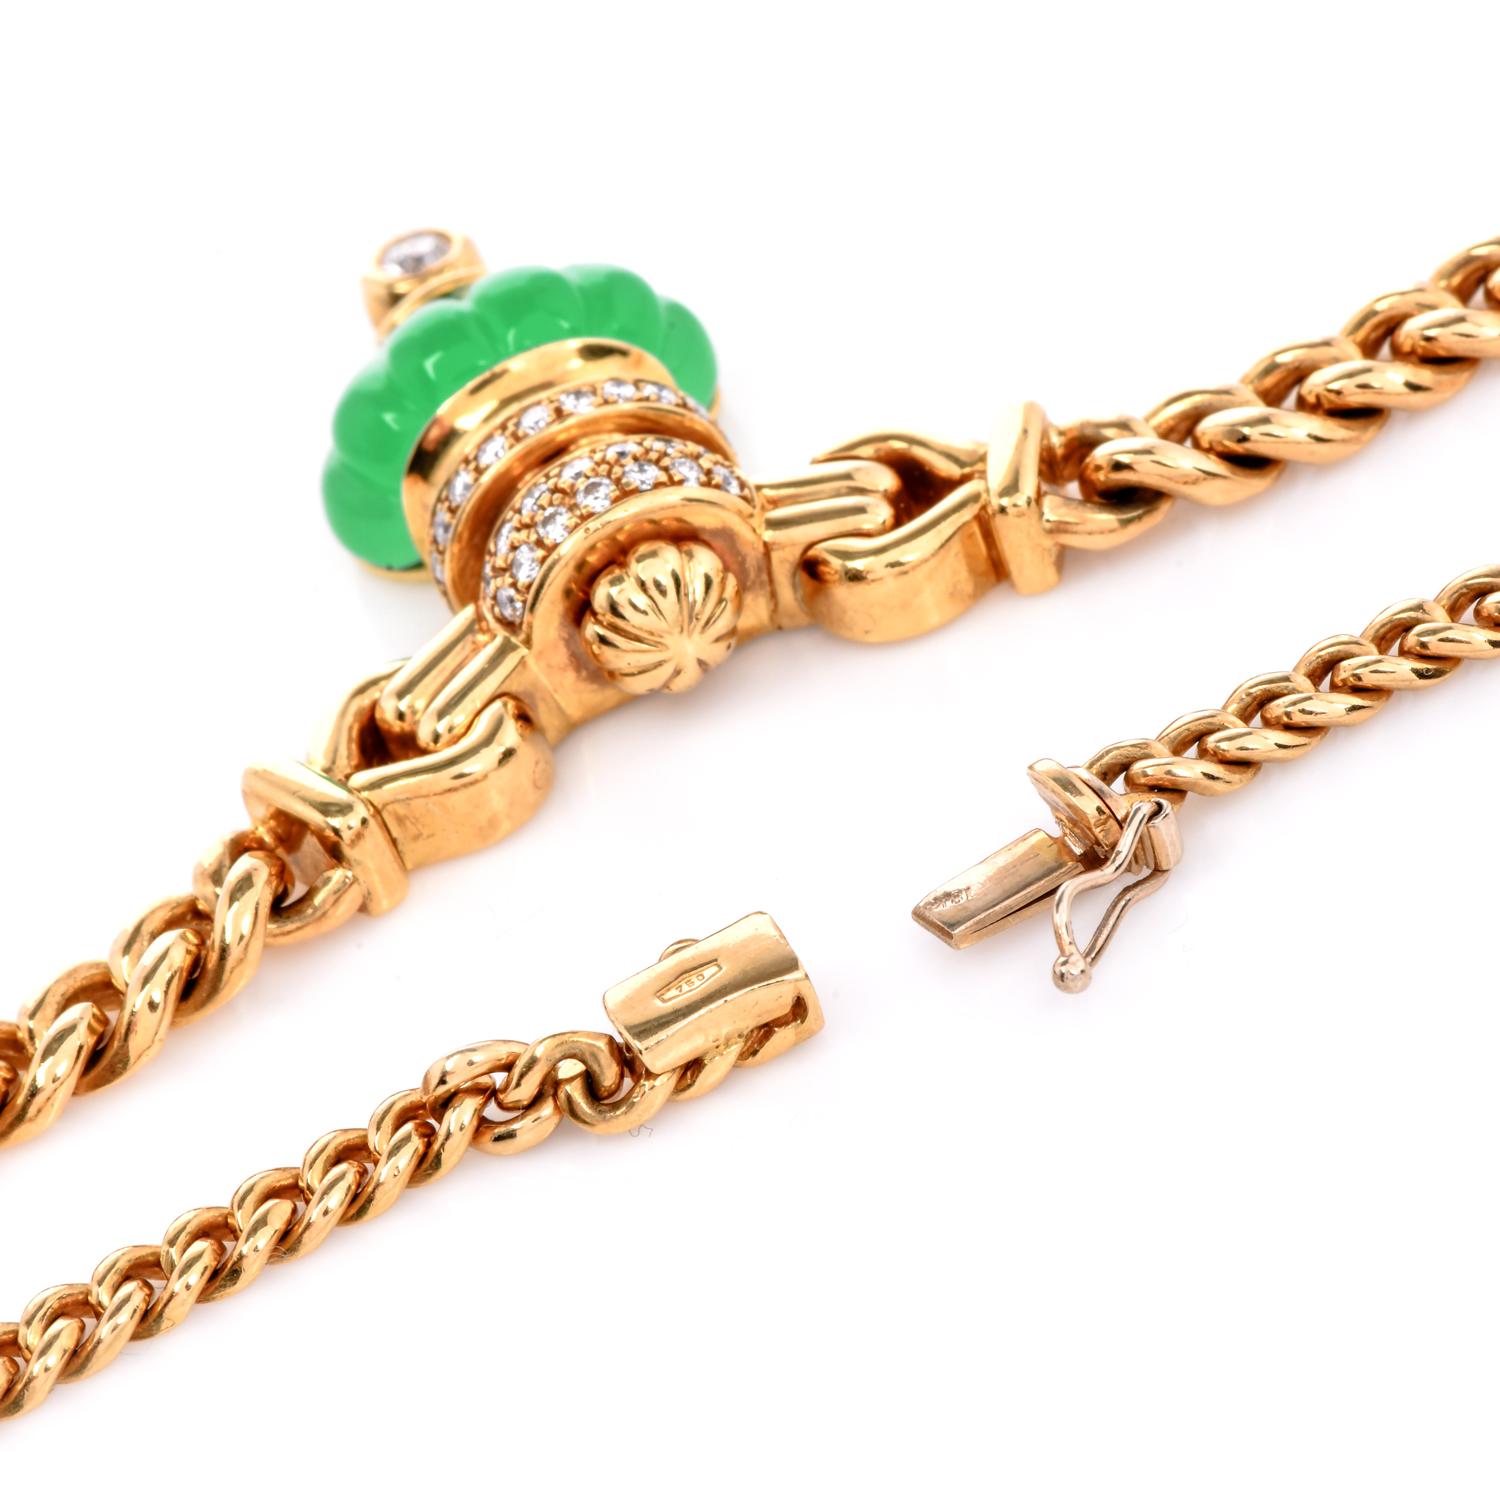 1980s  Chrysoprase Diamond Gold Pendant Curb Link Necklace  In Excellent Condition For Sale In Miami, FL